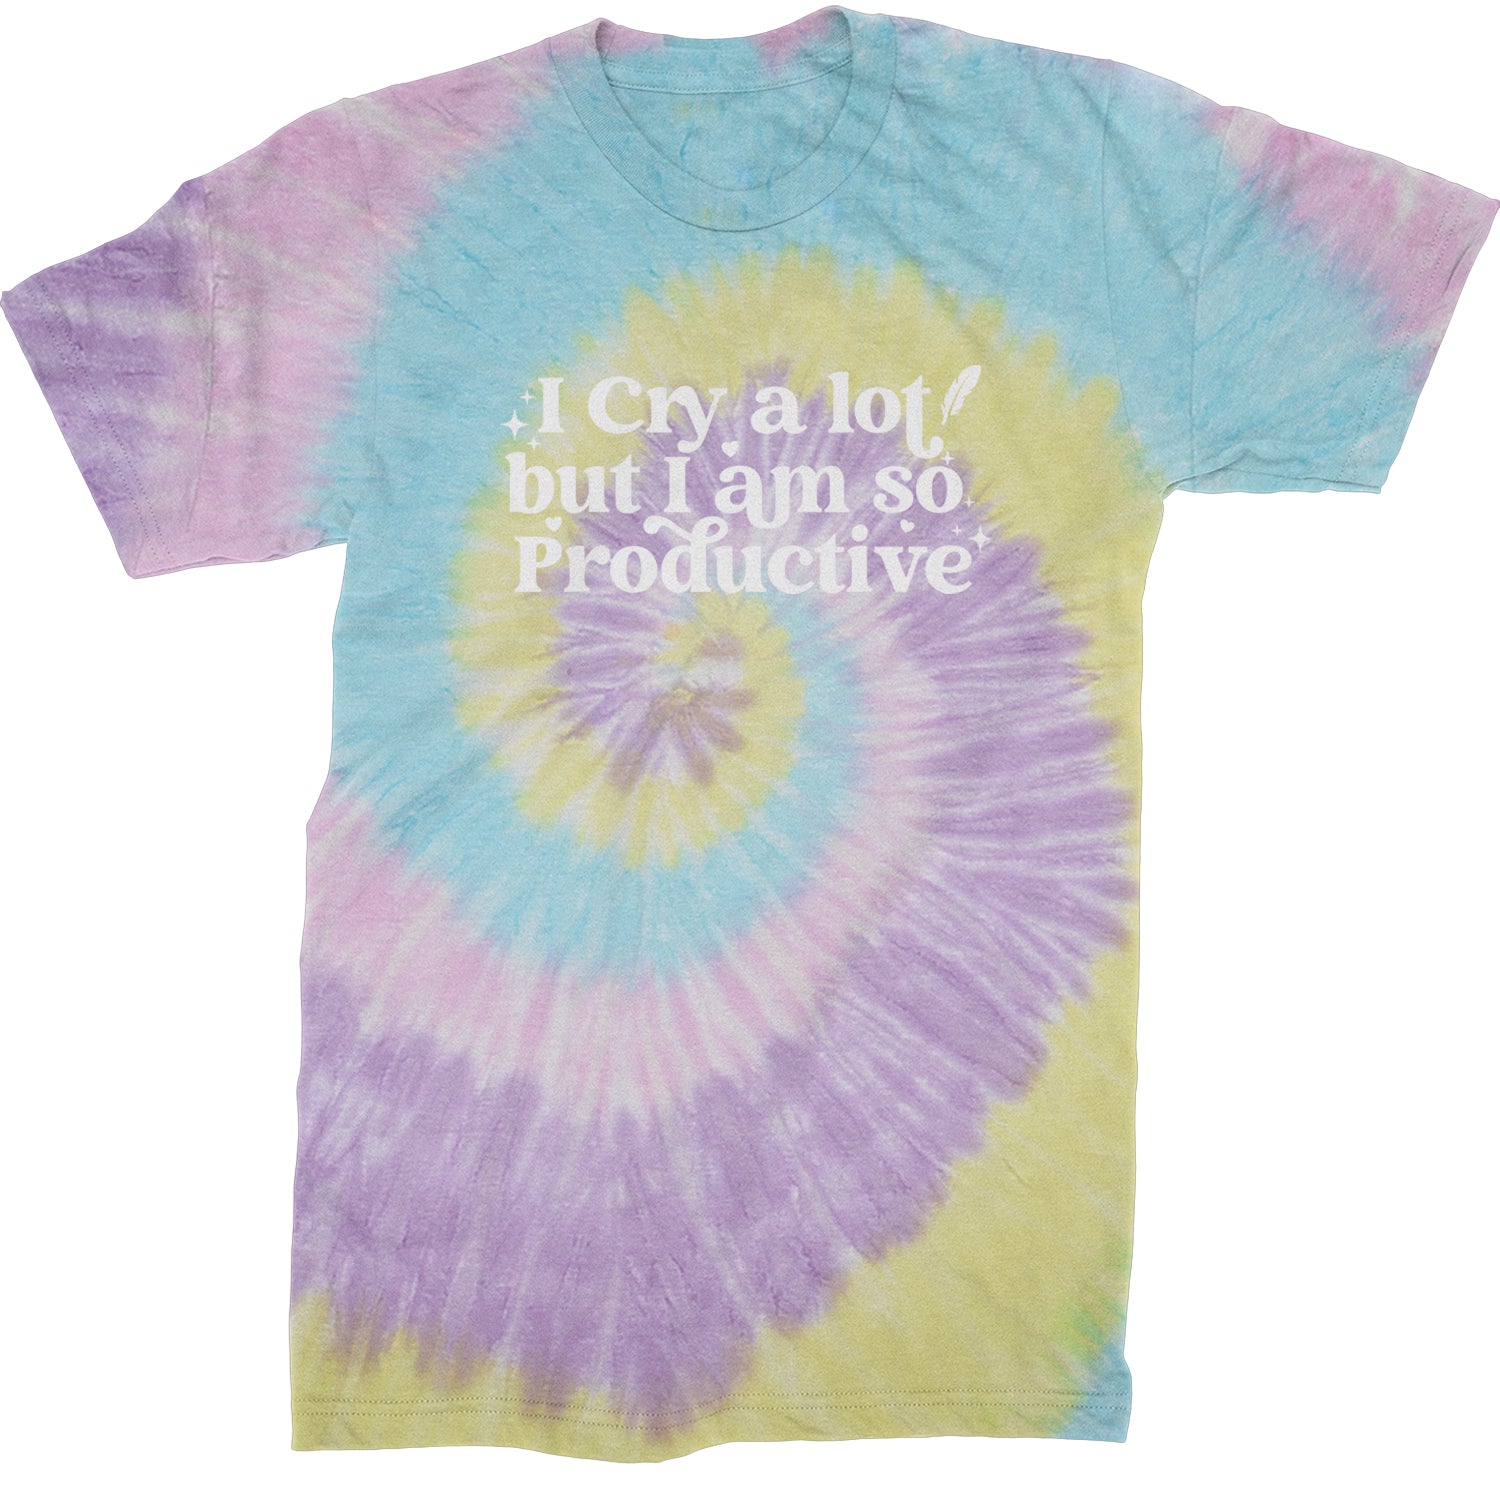 I Cry A Lot But I am So Productive TTPD Mens T-shirt Tie-Dye Jellybean